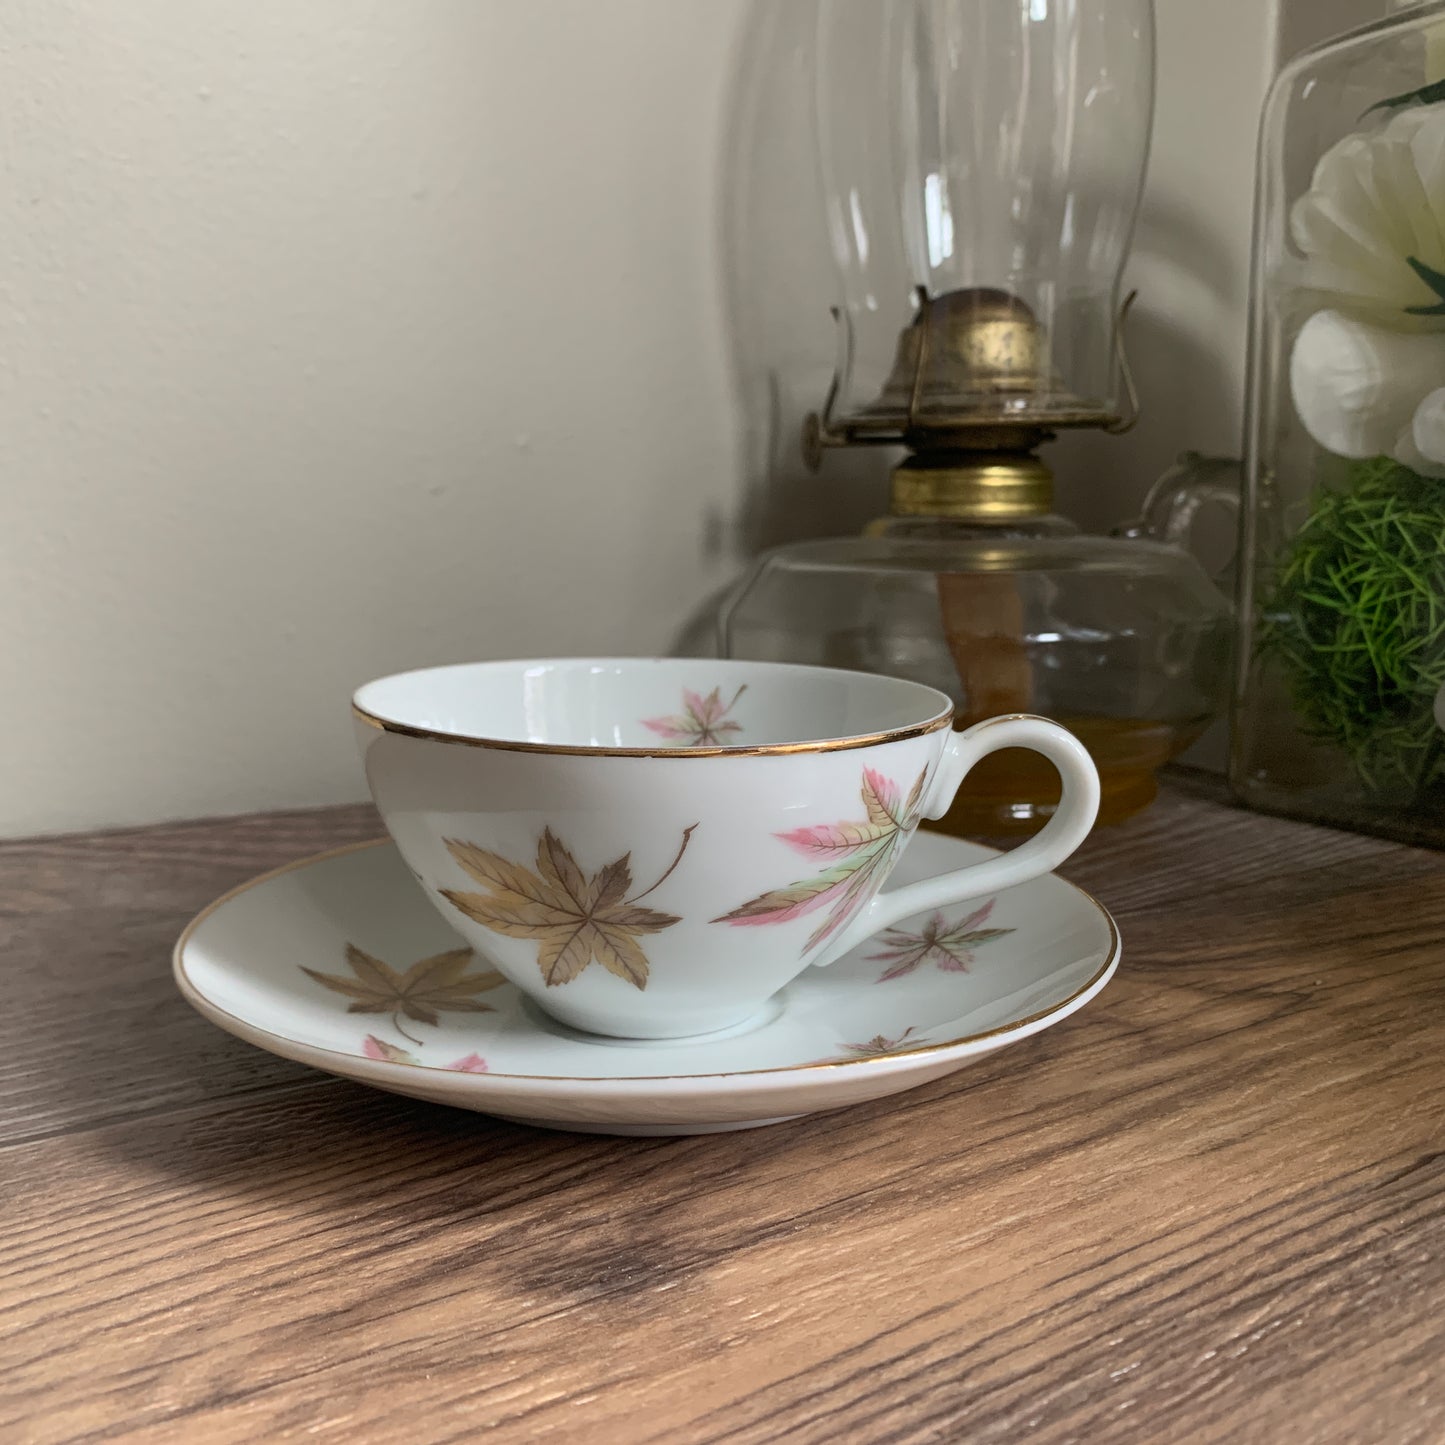 Royal Ming China Vintage Teacup and Saucer with Maple Leaves